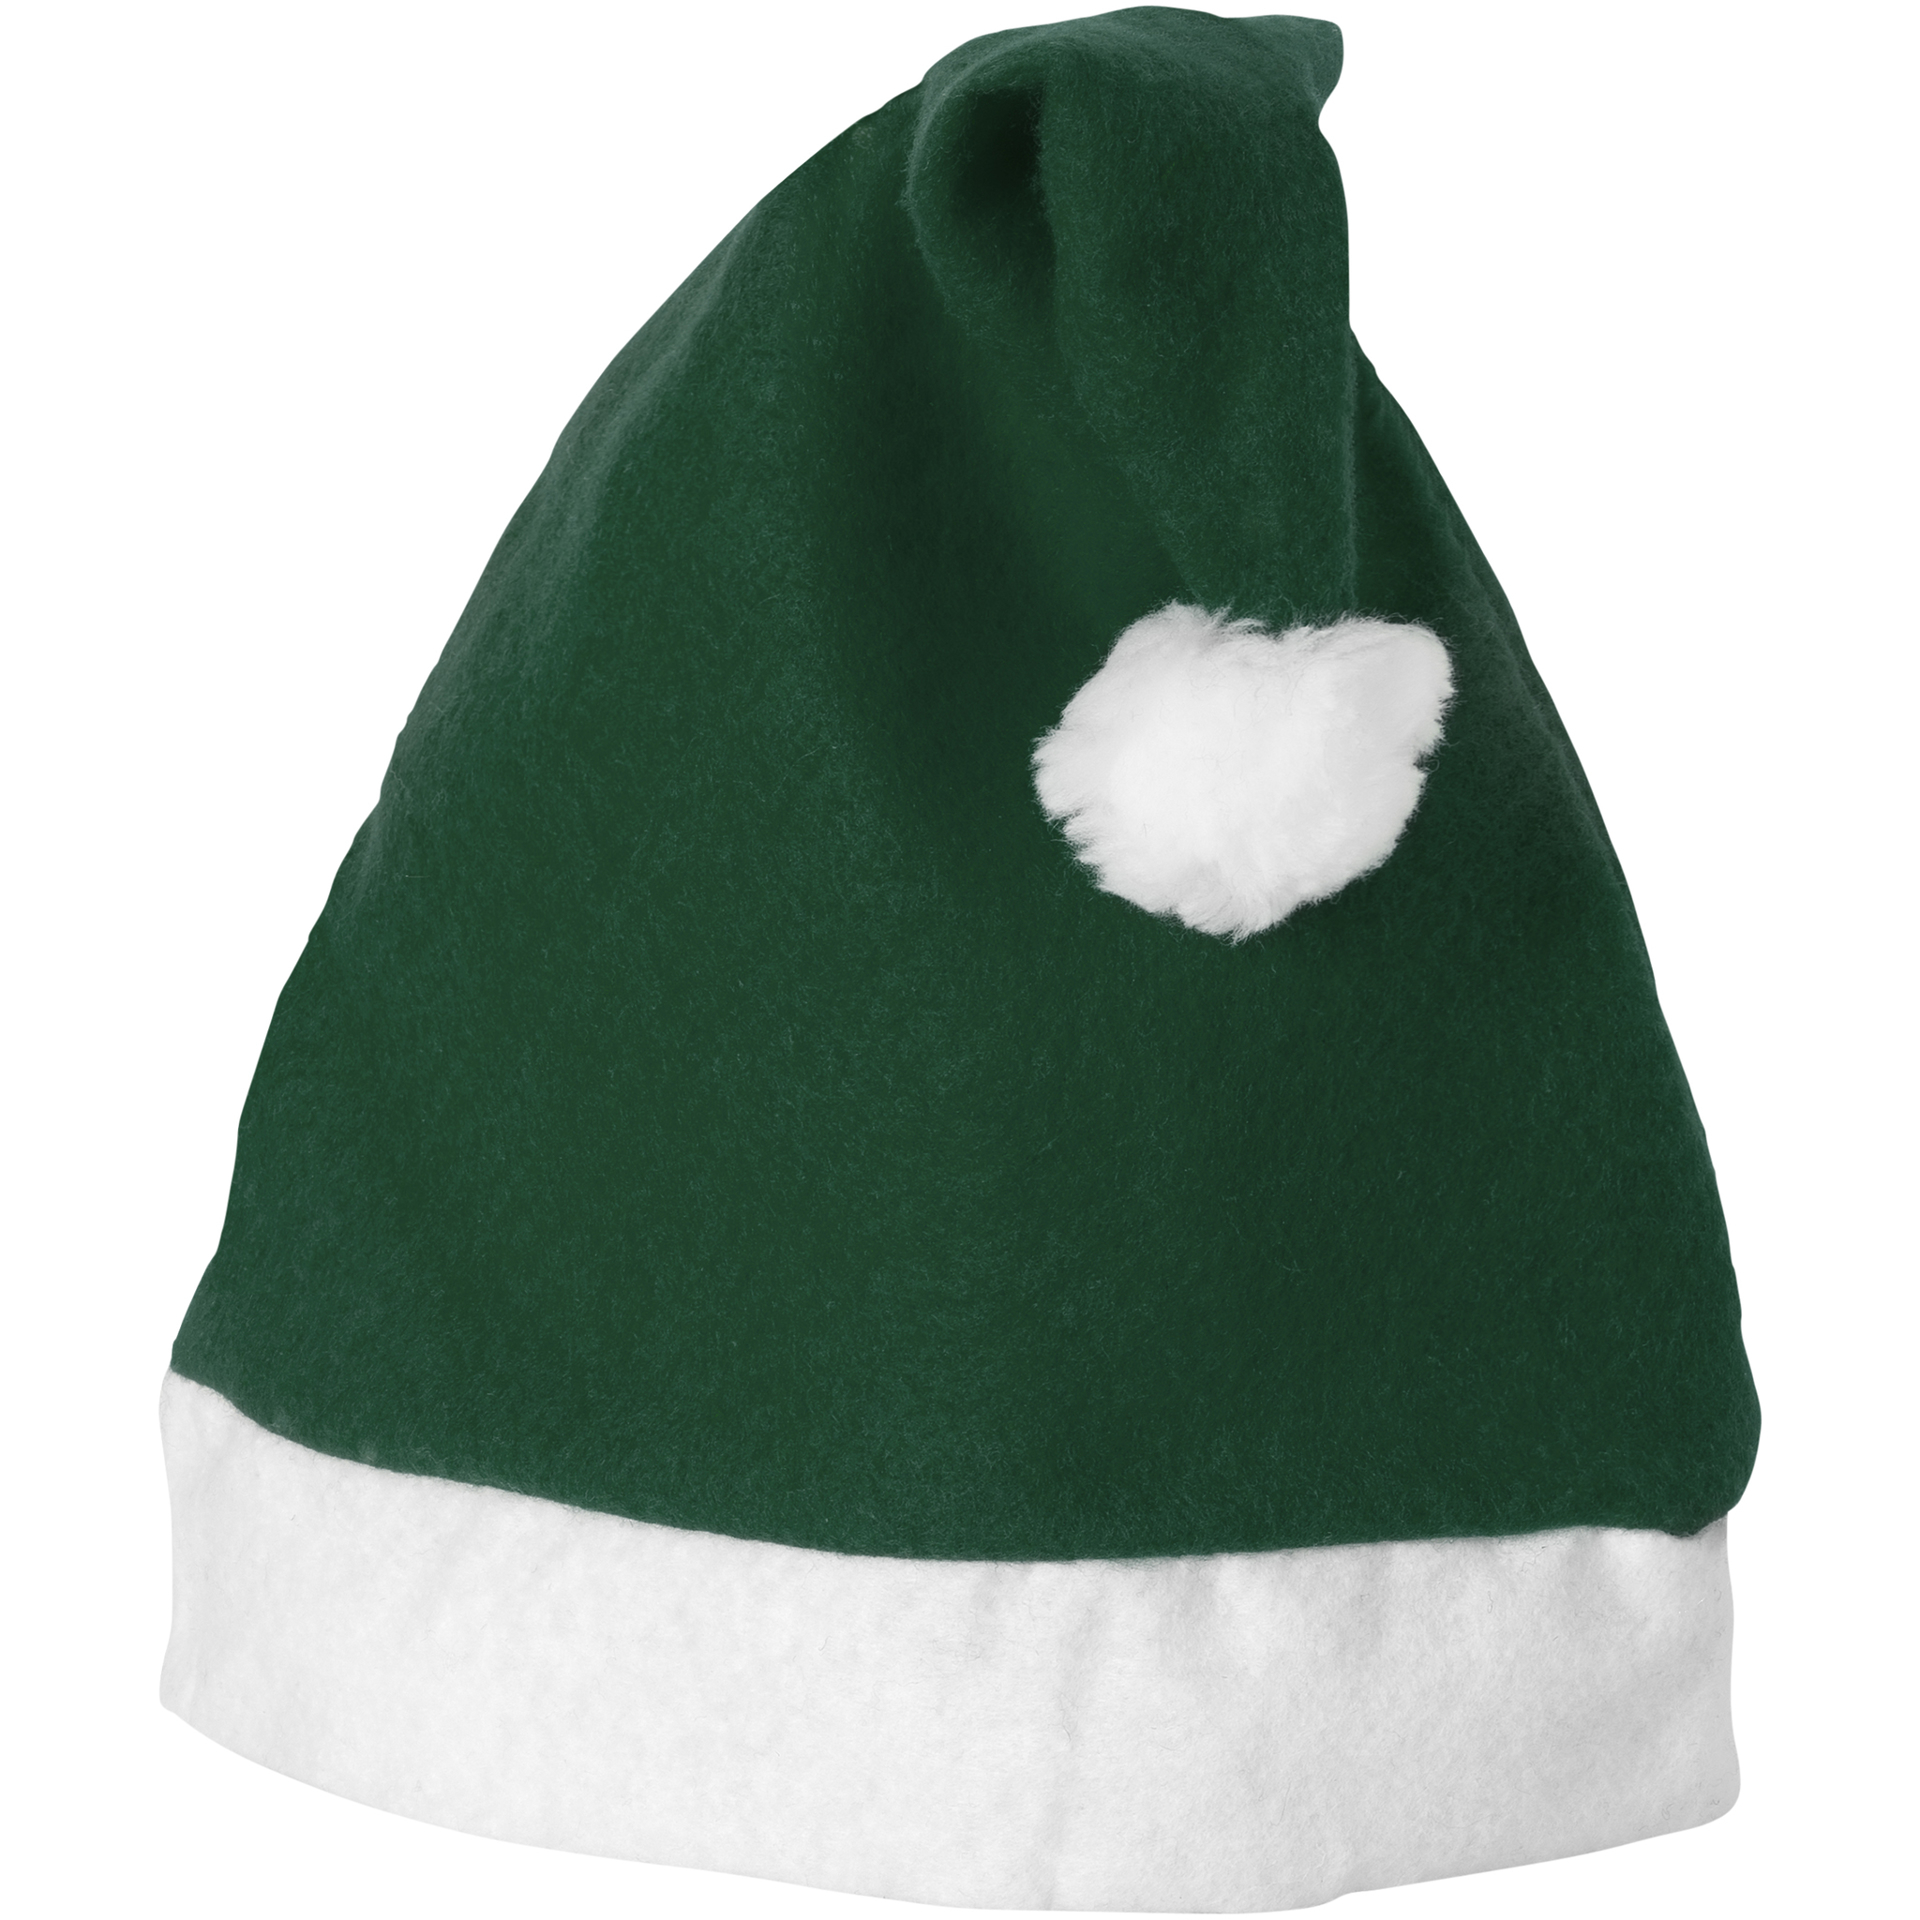 Christmas Hat in green and white